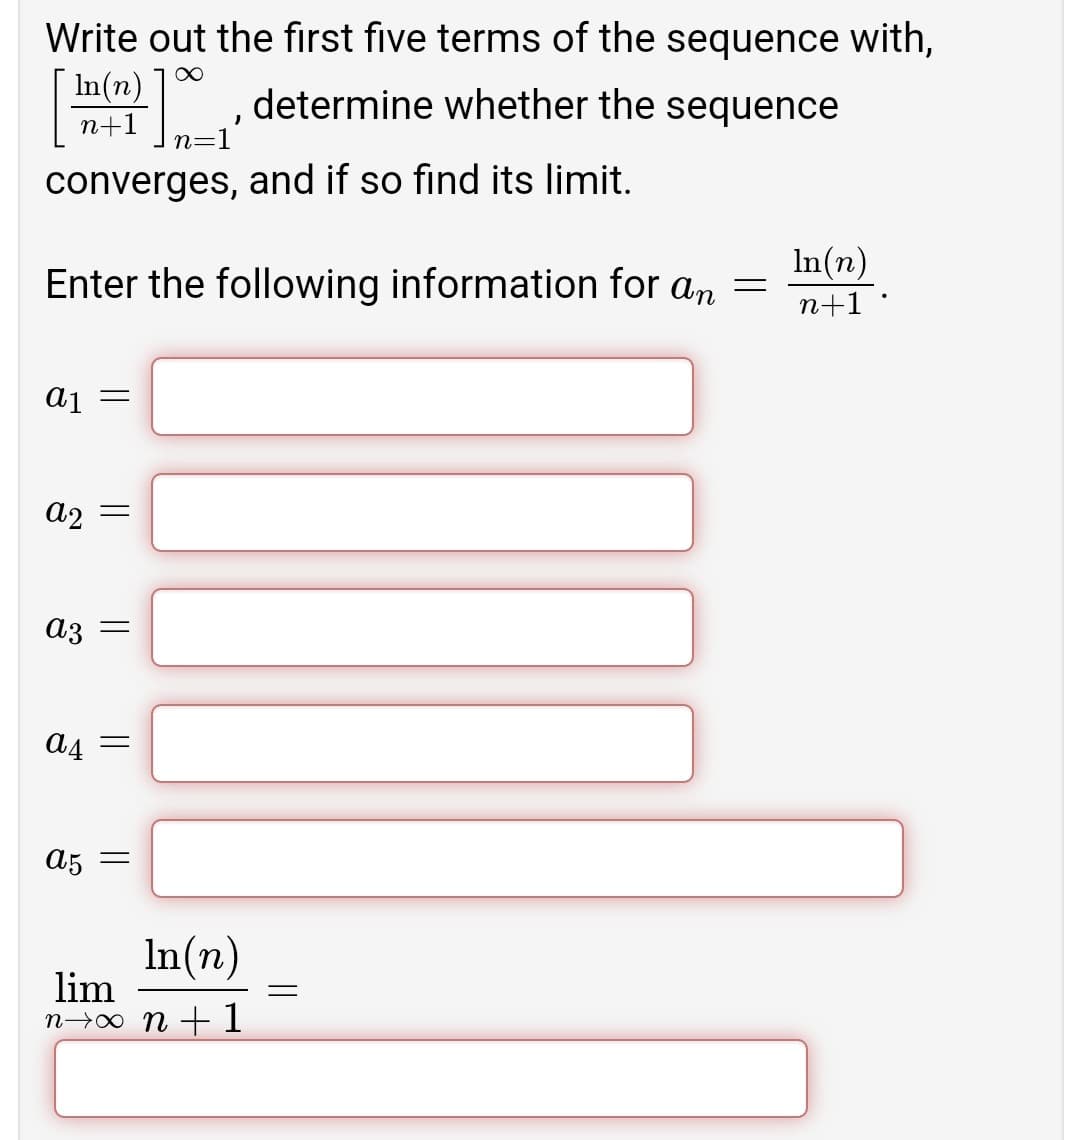 Write out the first five terms of the sequence with,
In(n)
determine whether the sequence
n+1
n=1
converges, and if so find its limit.
In(n)
Enter the following information for an =
n+1 ·
аз
a4
a5
In(n)
lim
n→00 n +1
||||
||
